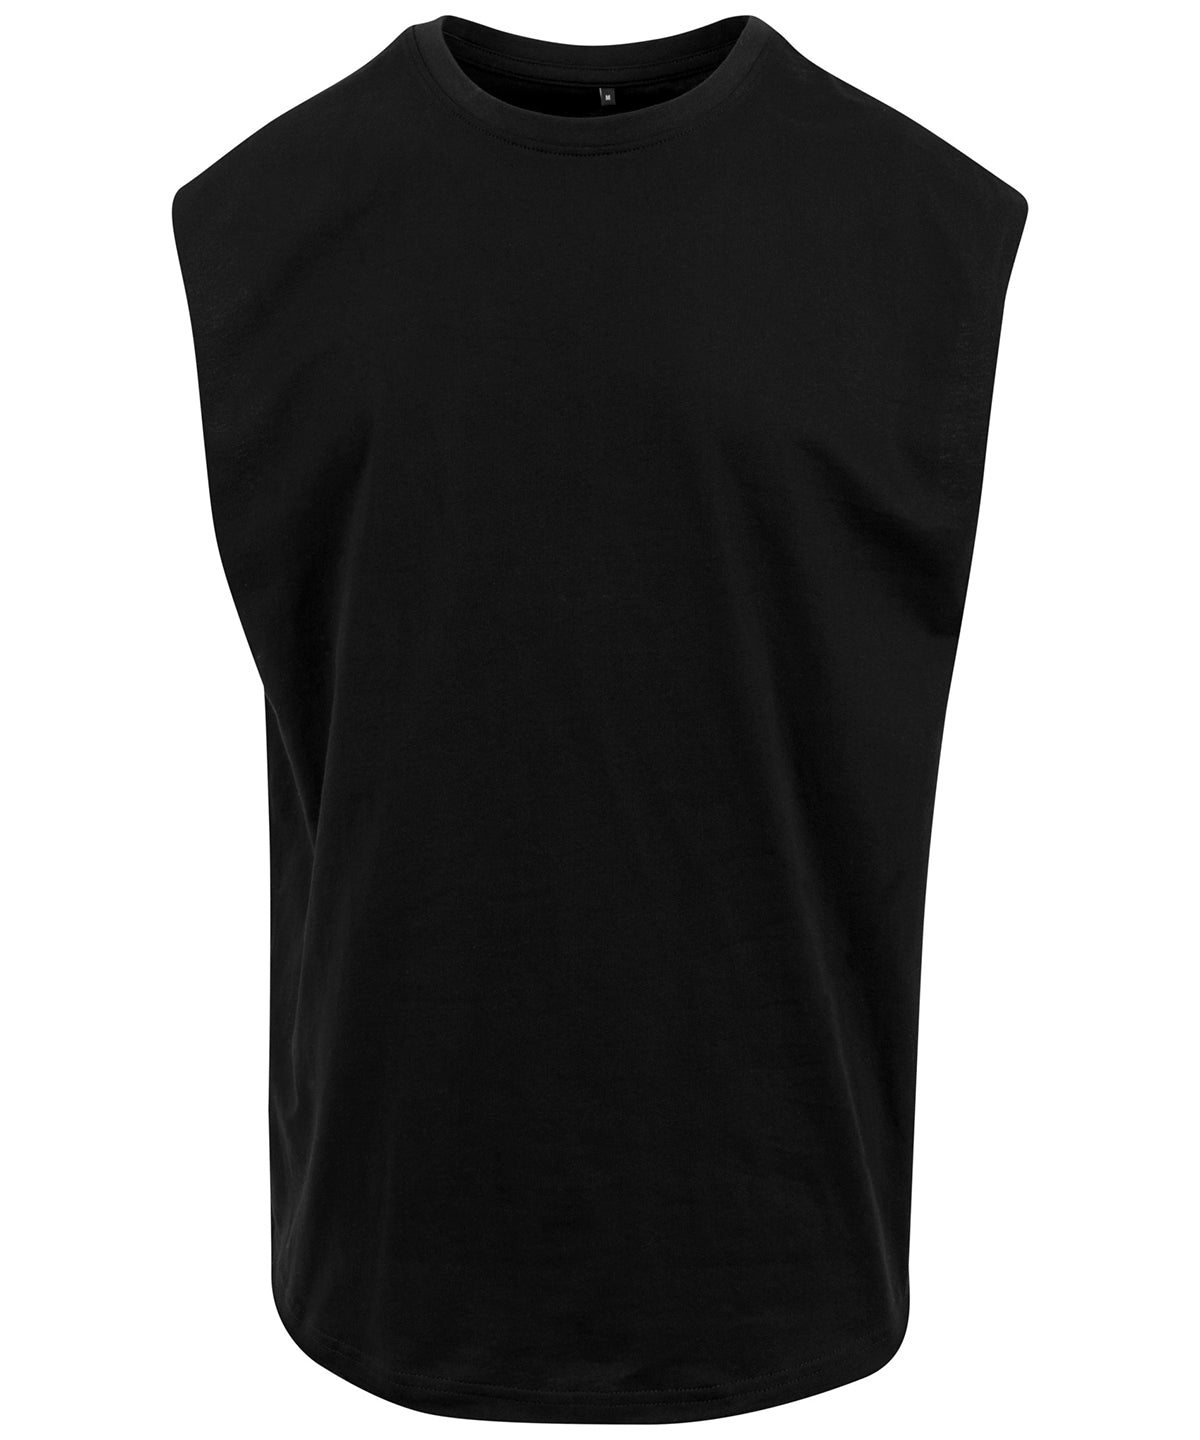 Personalised T-Shirts - Black Build Your Brand Sleeveless tee